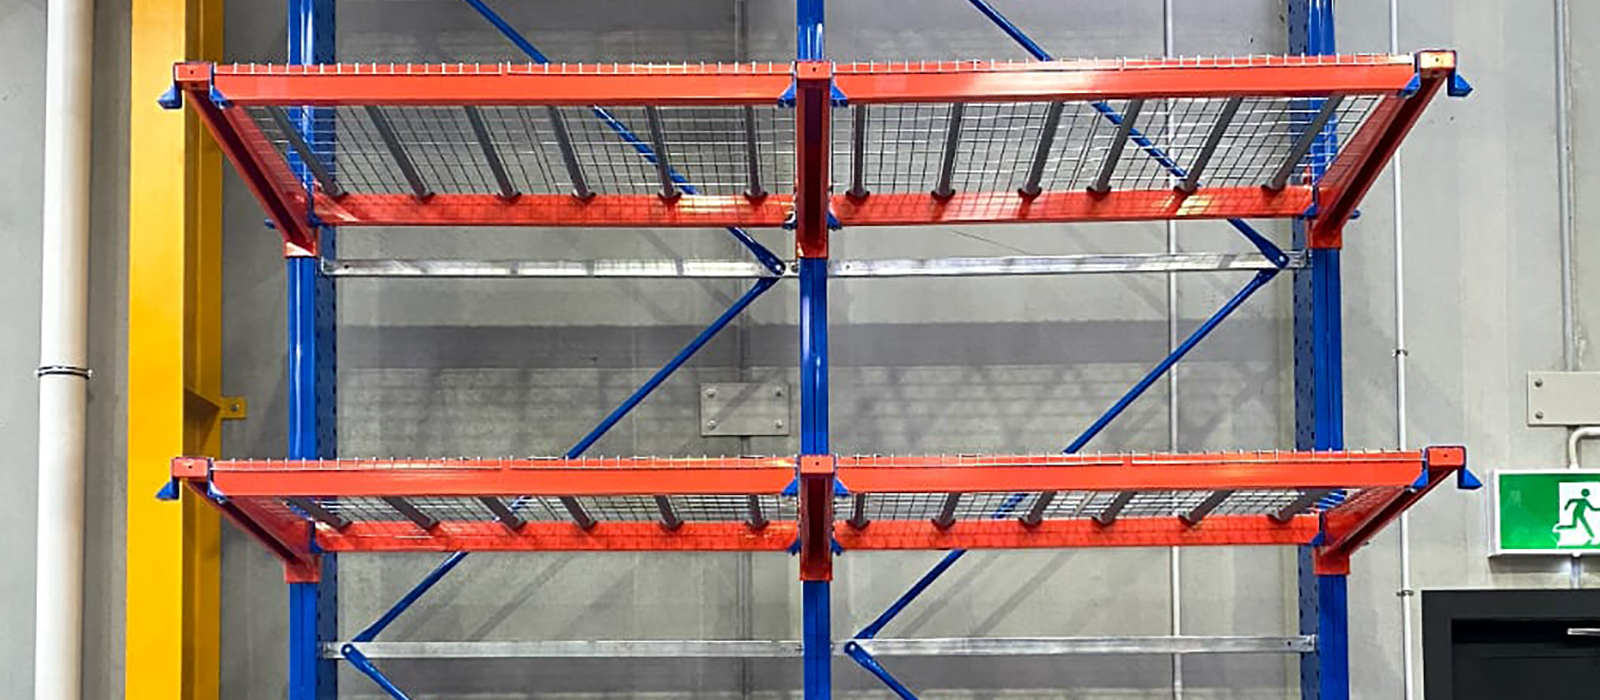 Intaks-Heavy-Duty-Cantilever-Racking-with-Support-Bars-and-Mesh-Decks_1Gallery